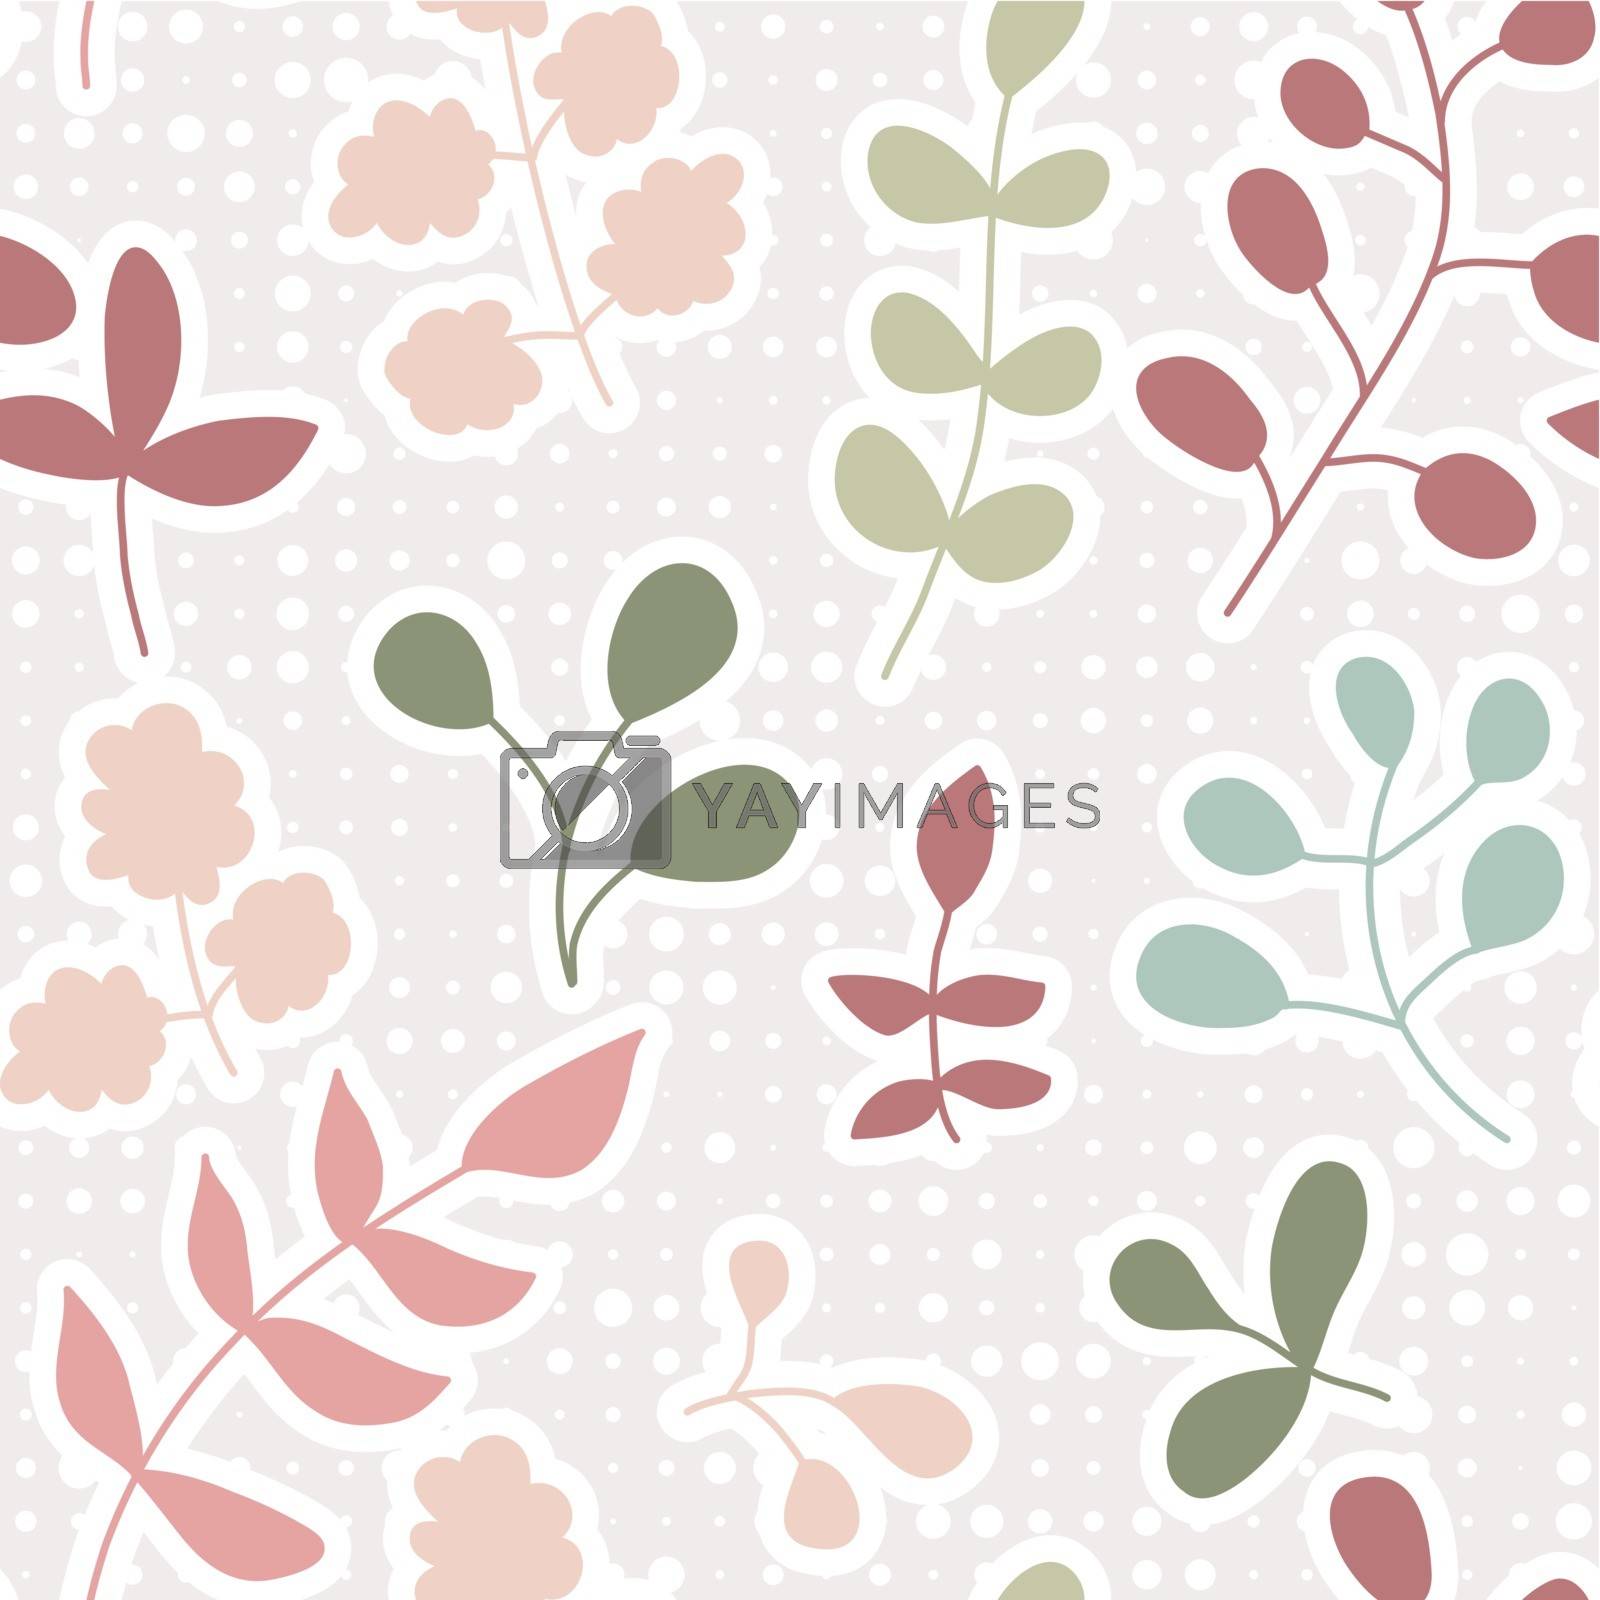 Royalty free image of seamless pattern leaf by LittleCuckoo